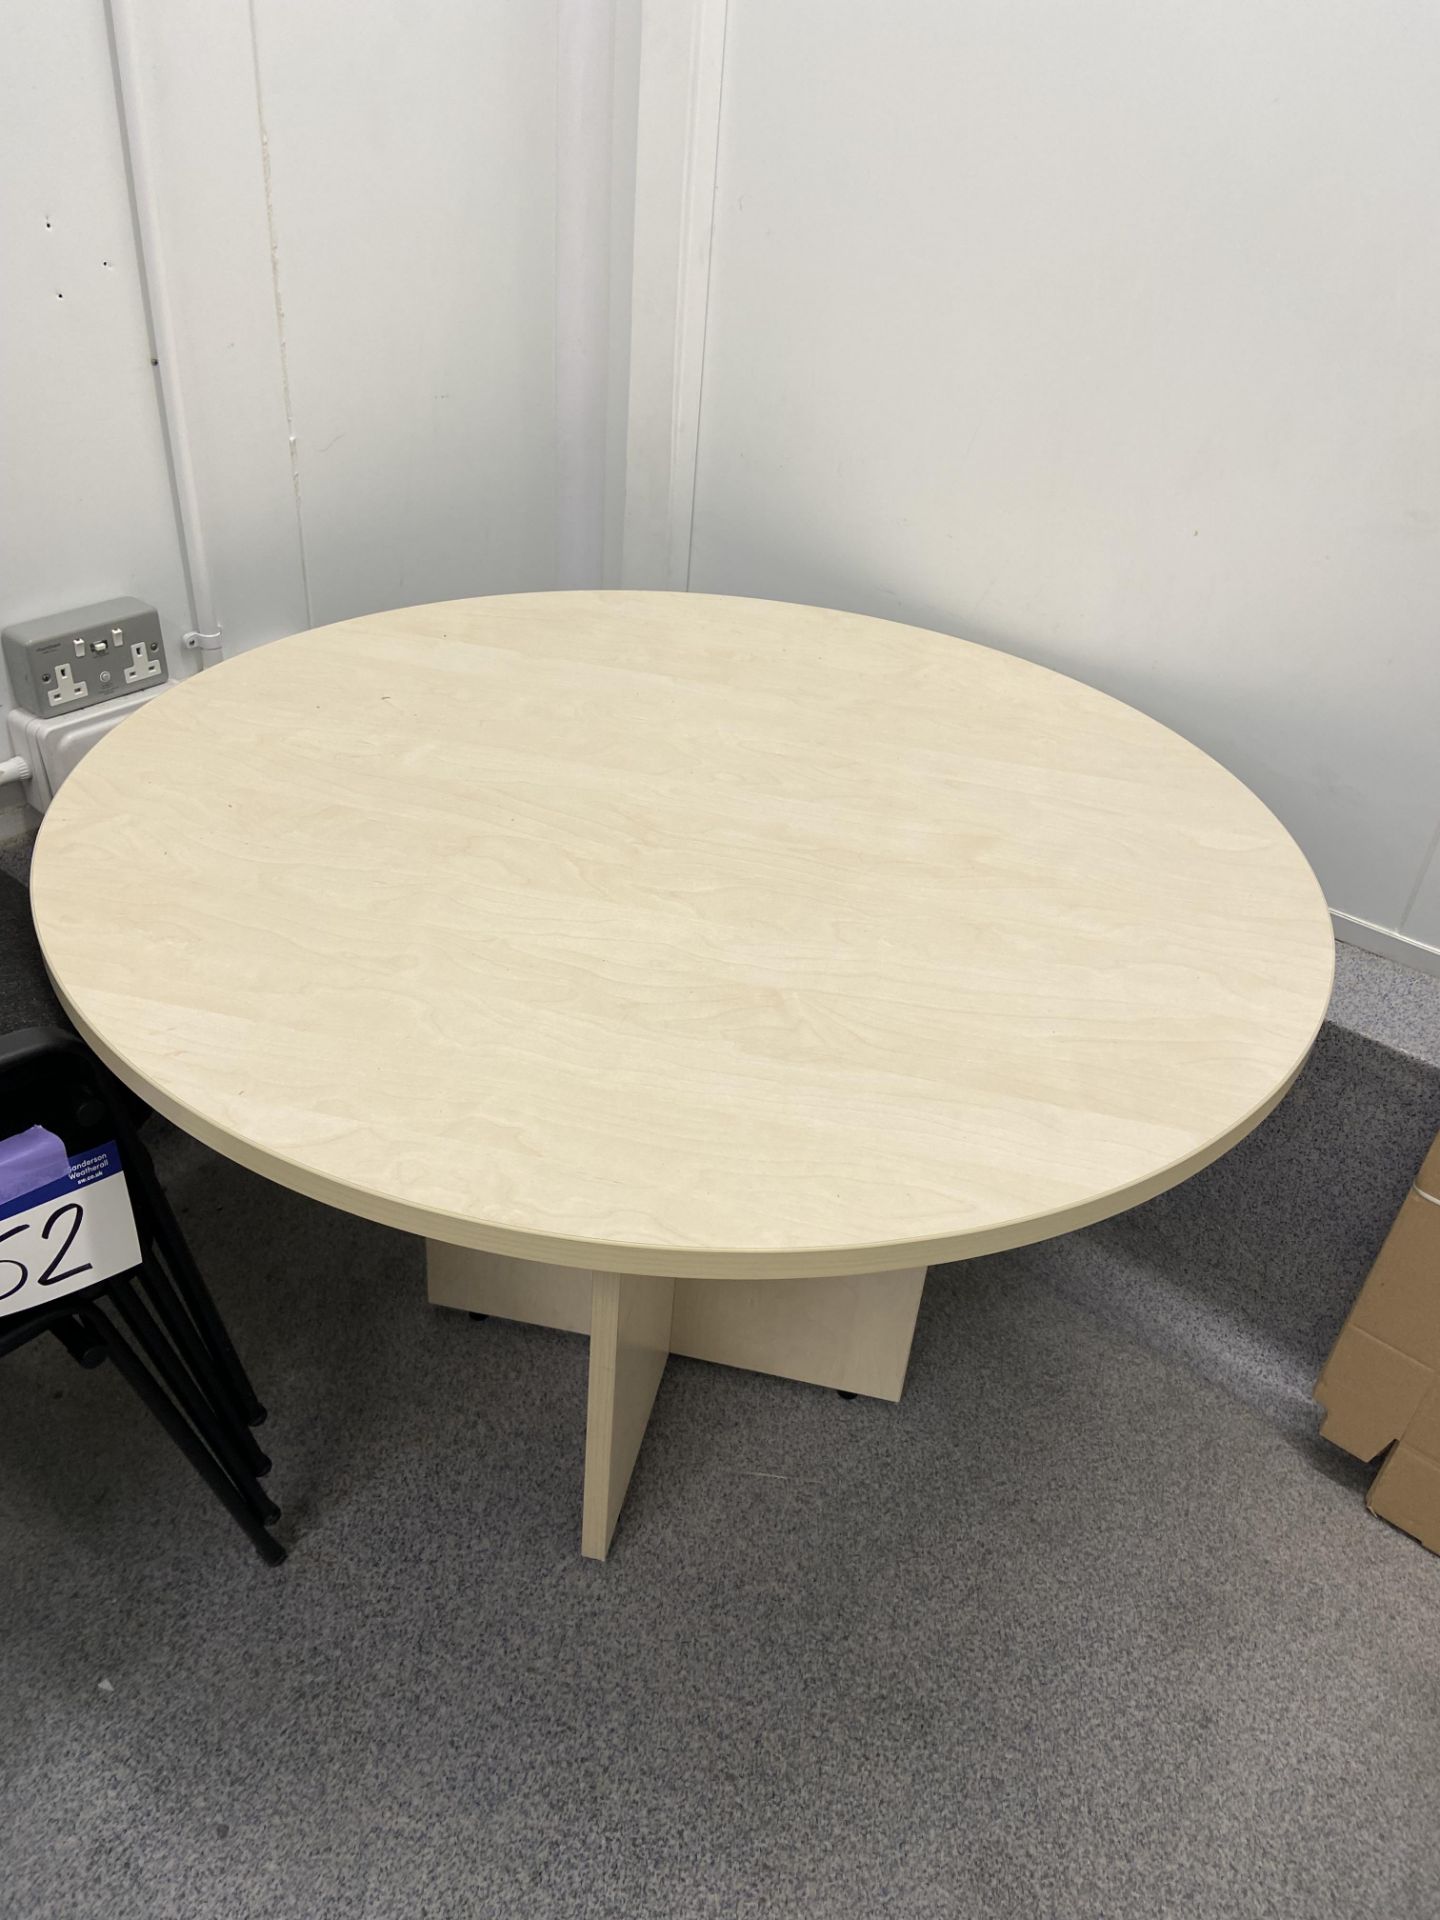 Cantilever Framed Desk, with circular meeting table and desk pedestalPlease read the following - Image 2 of 2